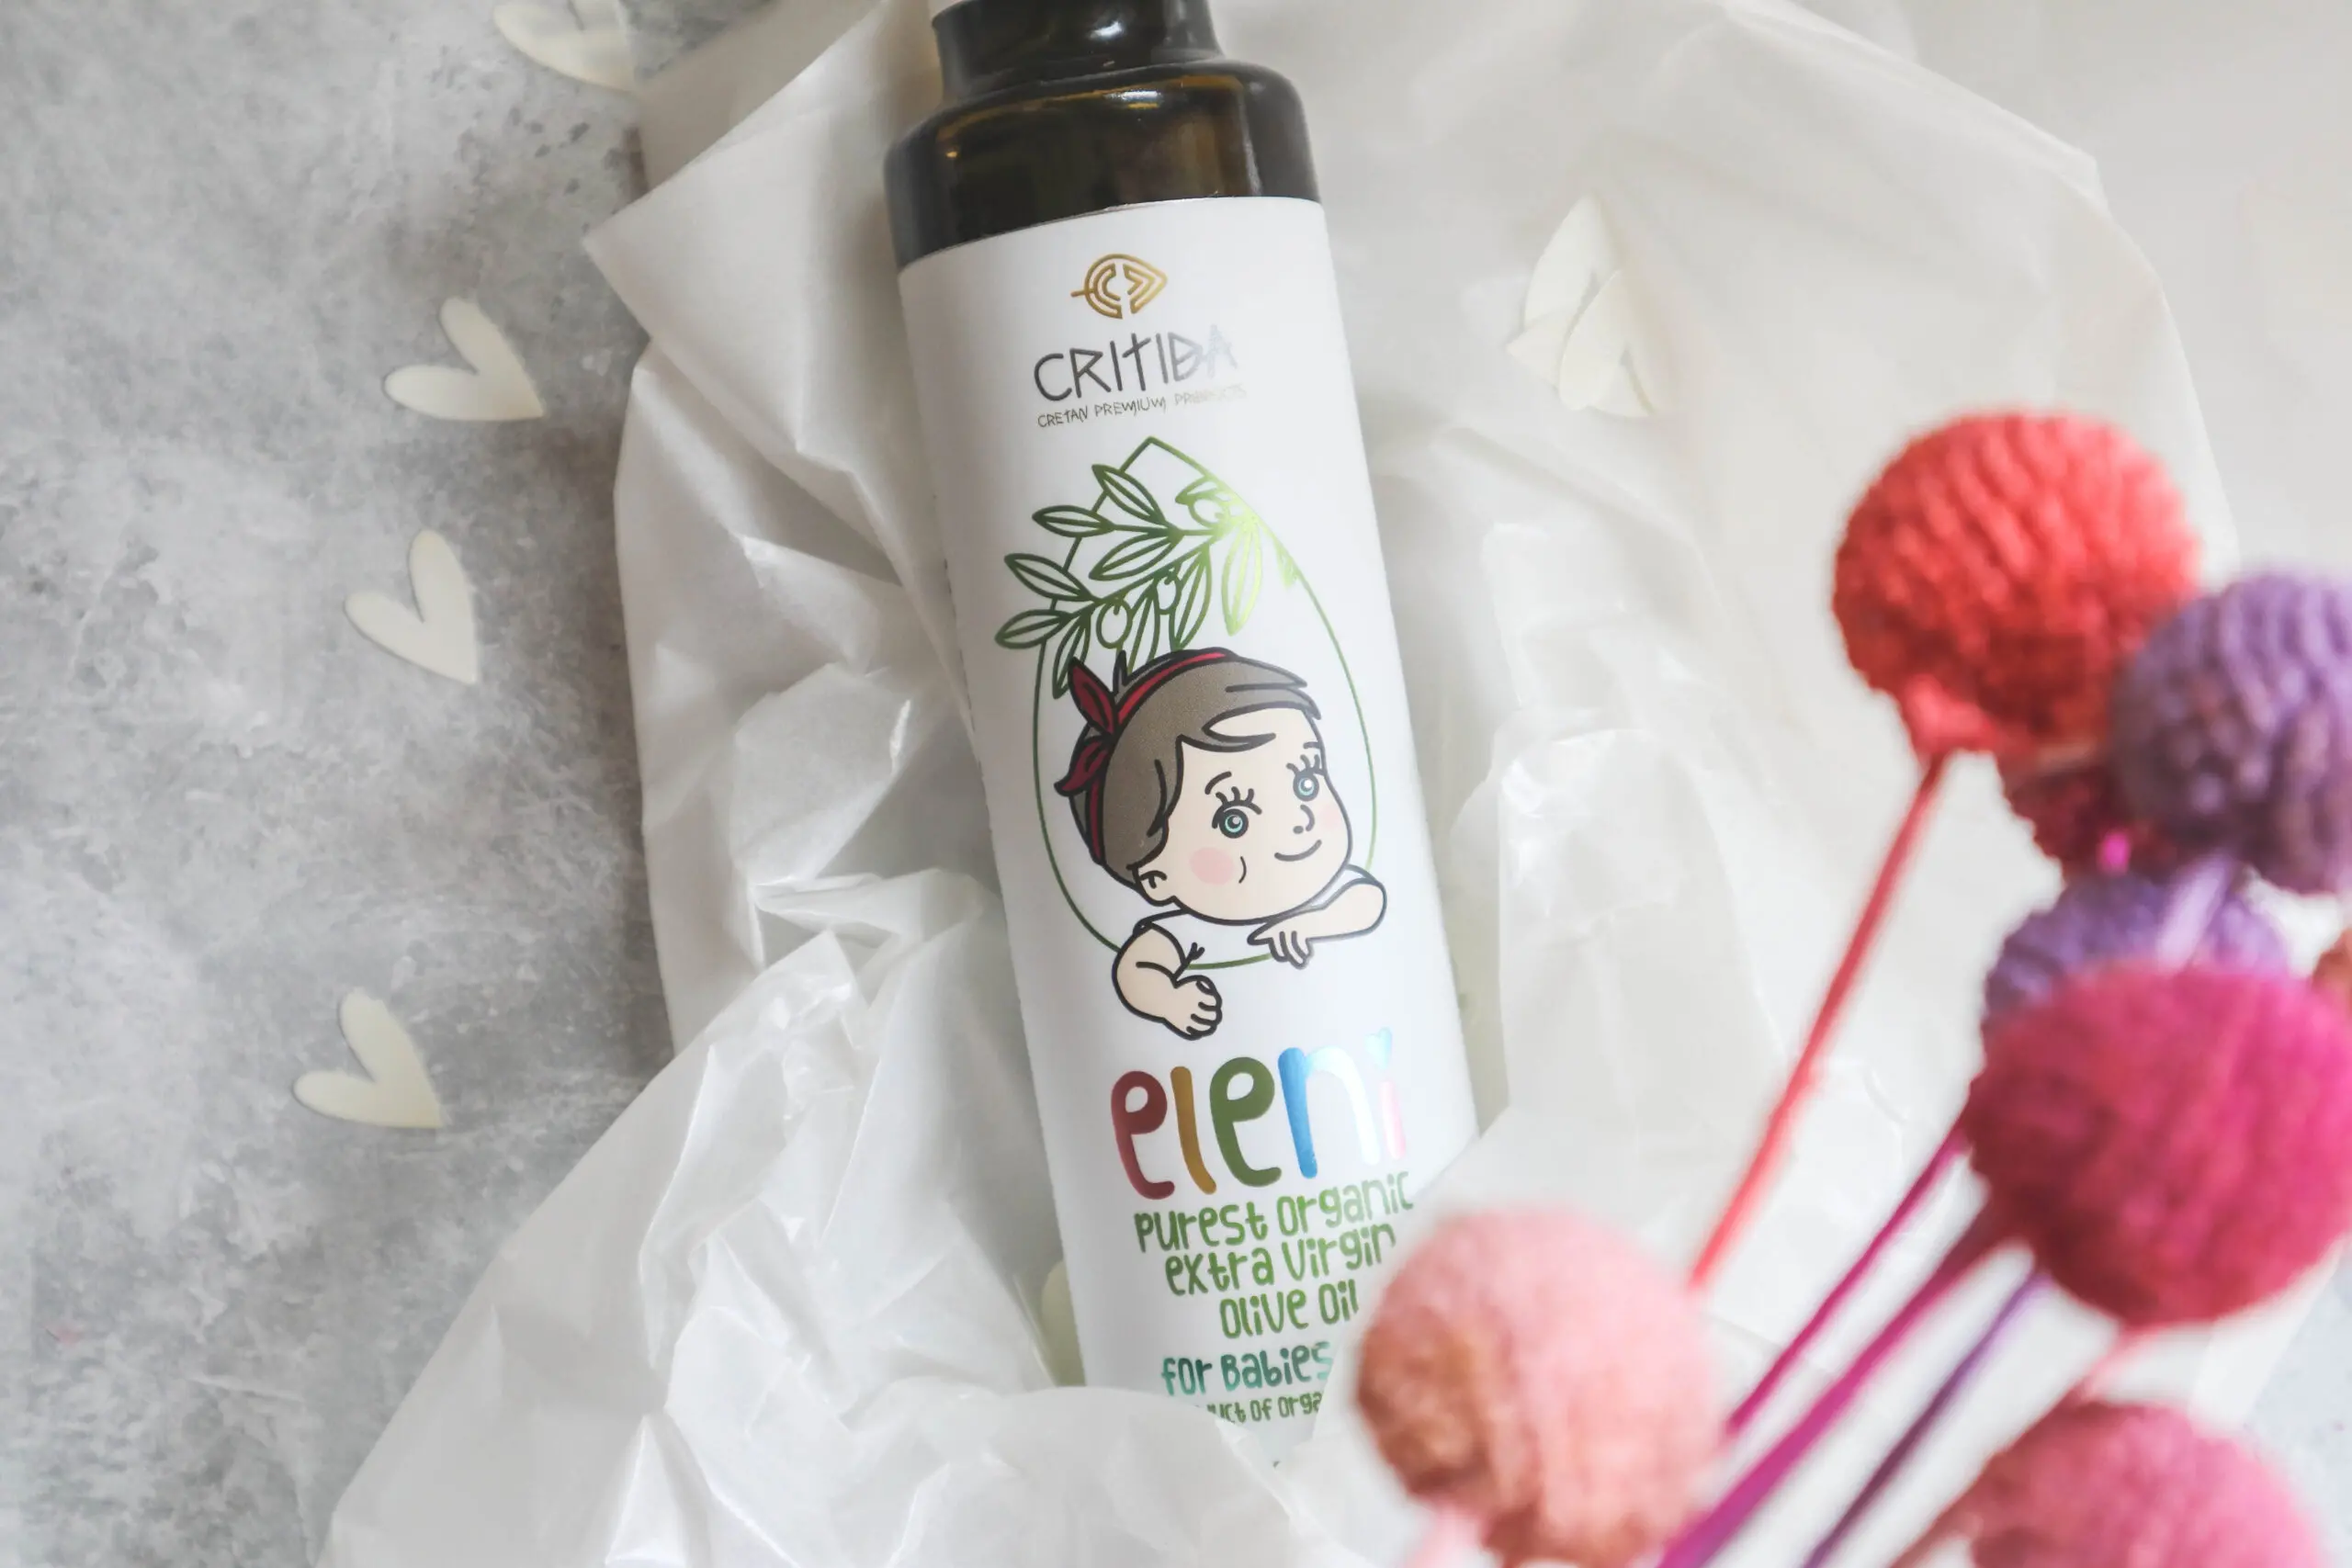 organic extra virgin olive oil for babies and kids from Crete